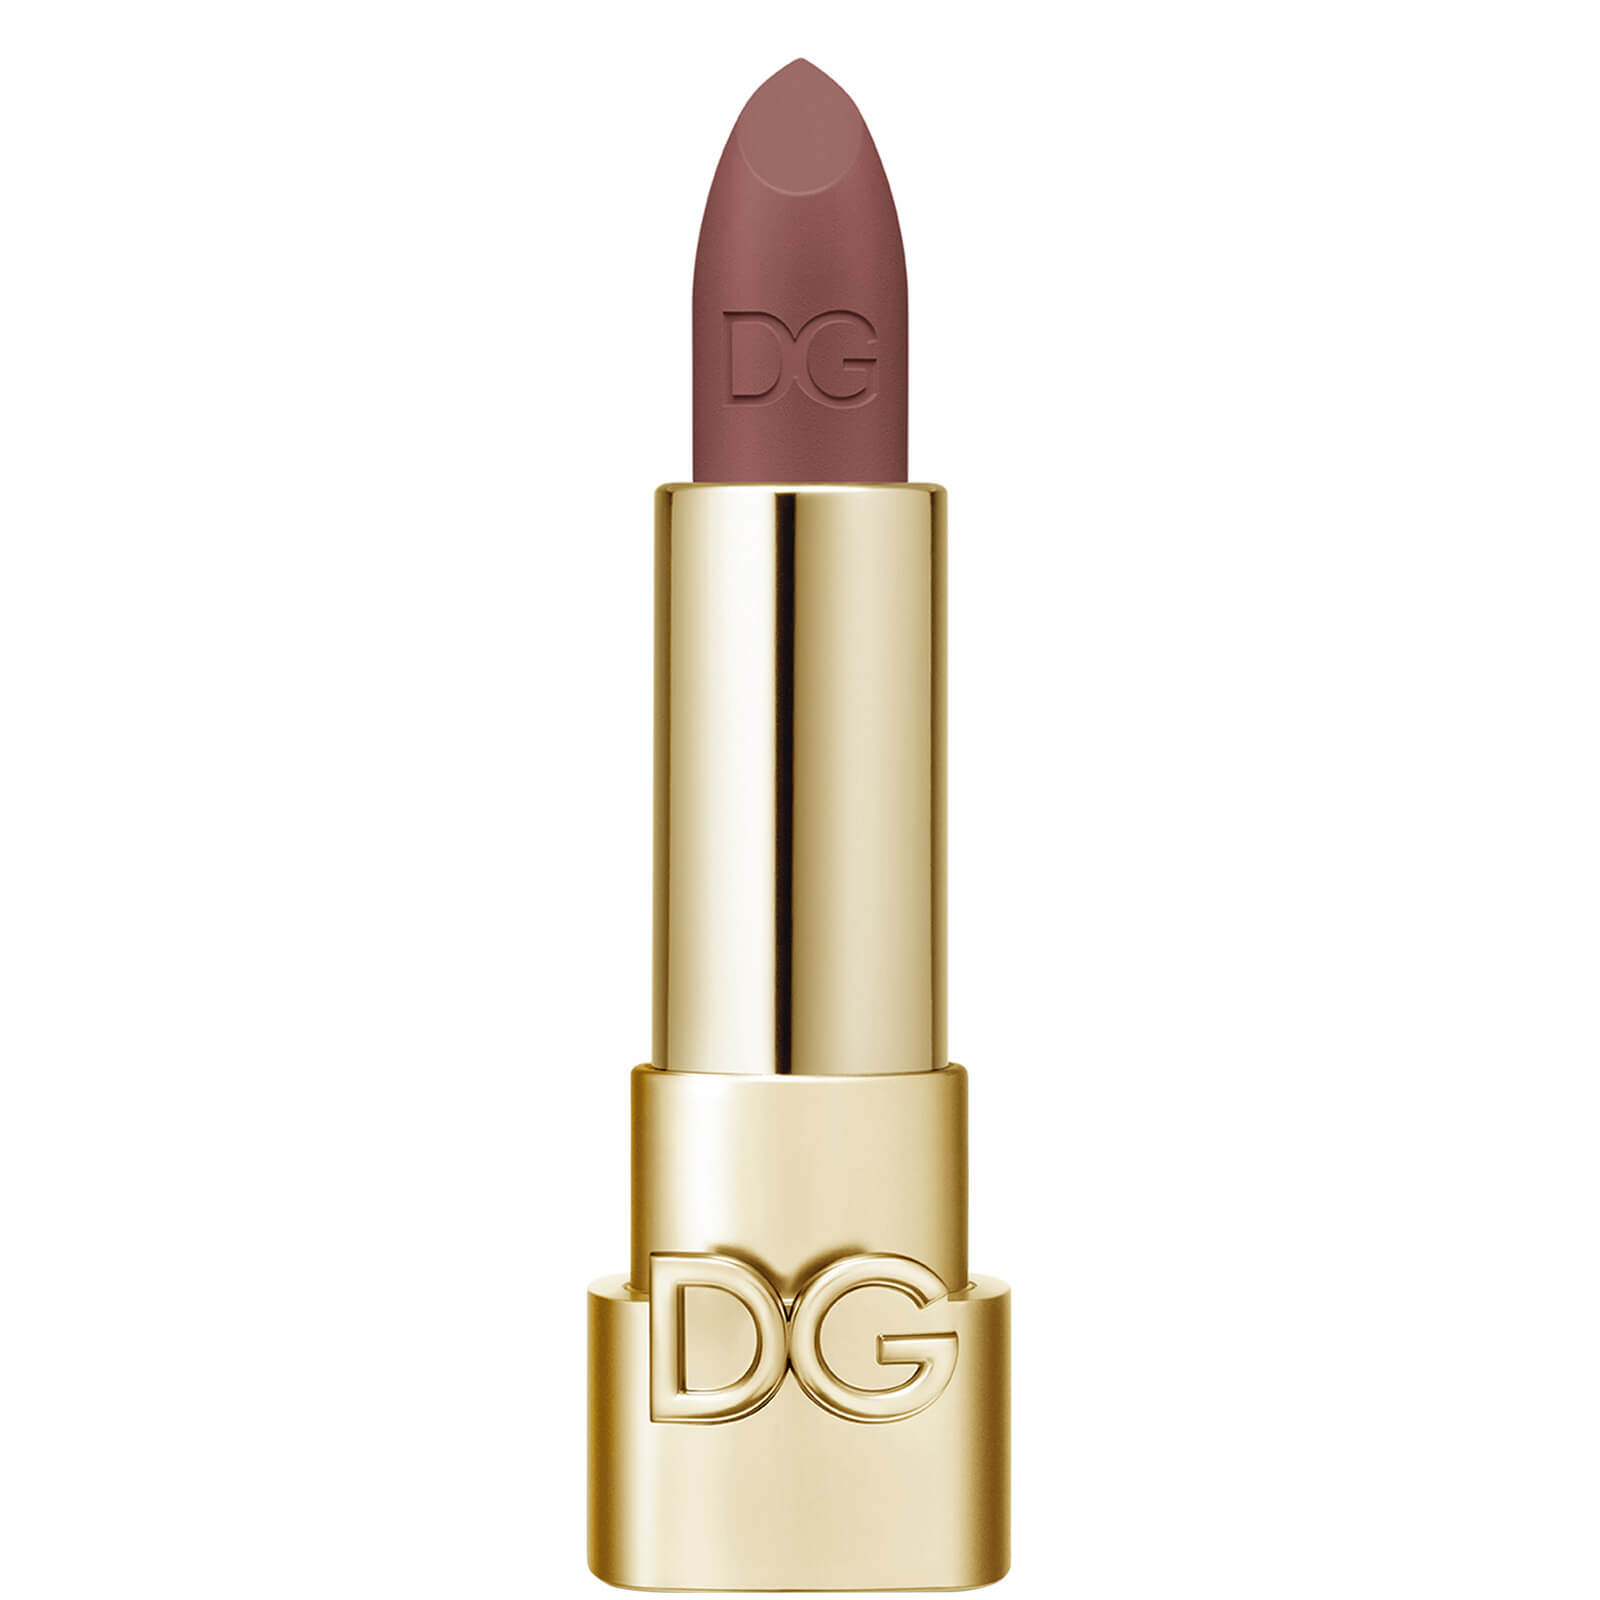 dolce&gabbana the only one matte lipstick 3.5g (various shades) - creamy mocha